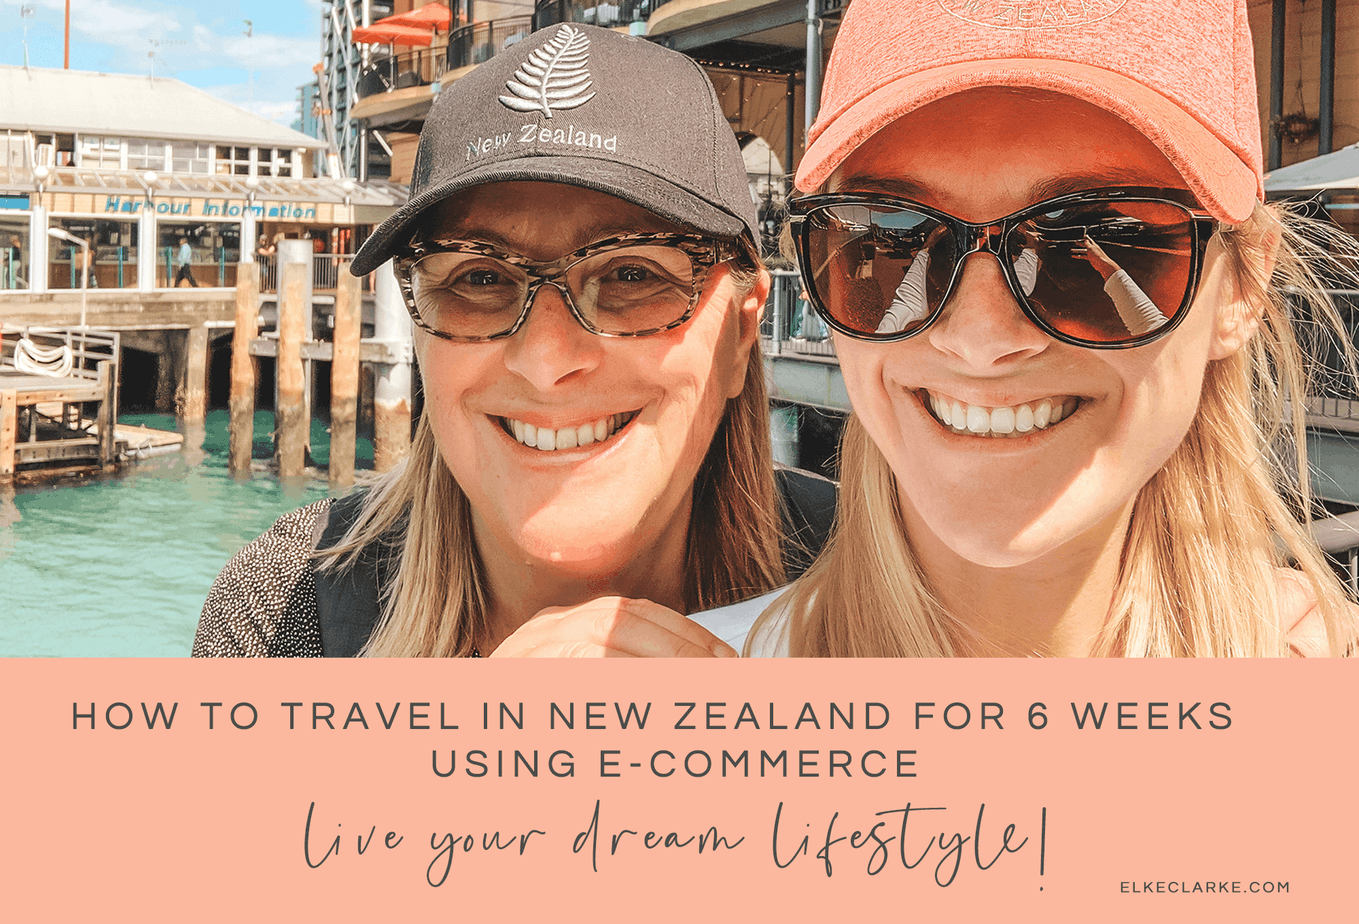 How to Travel in New Zealand for 6 Weeks Using E-Commerce andLive Your Dream Lifestyle by Elke Clarke